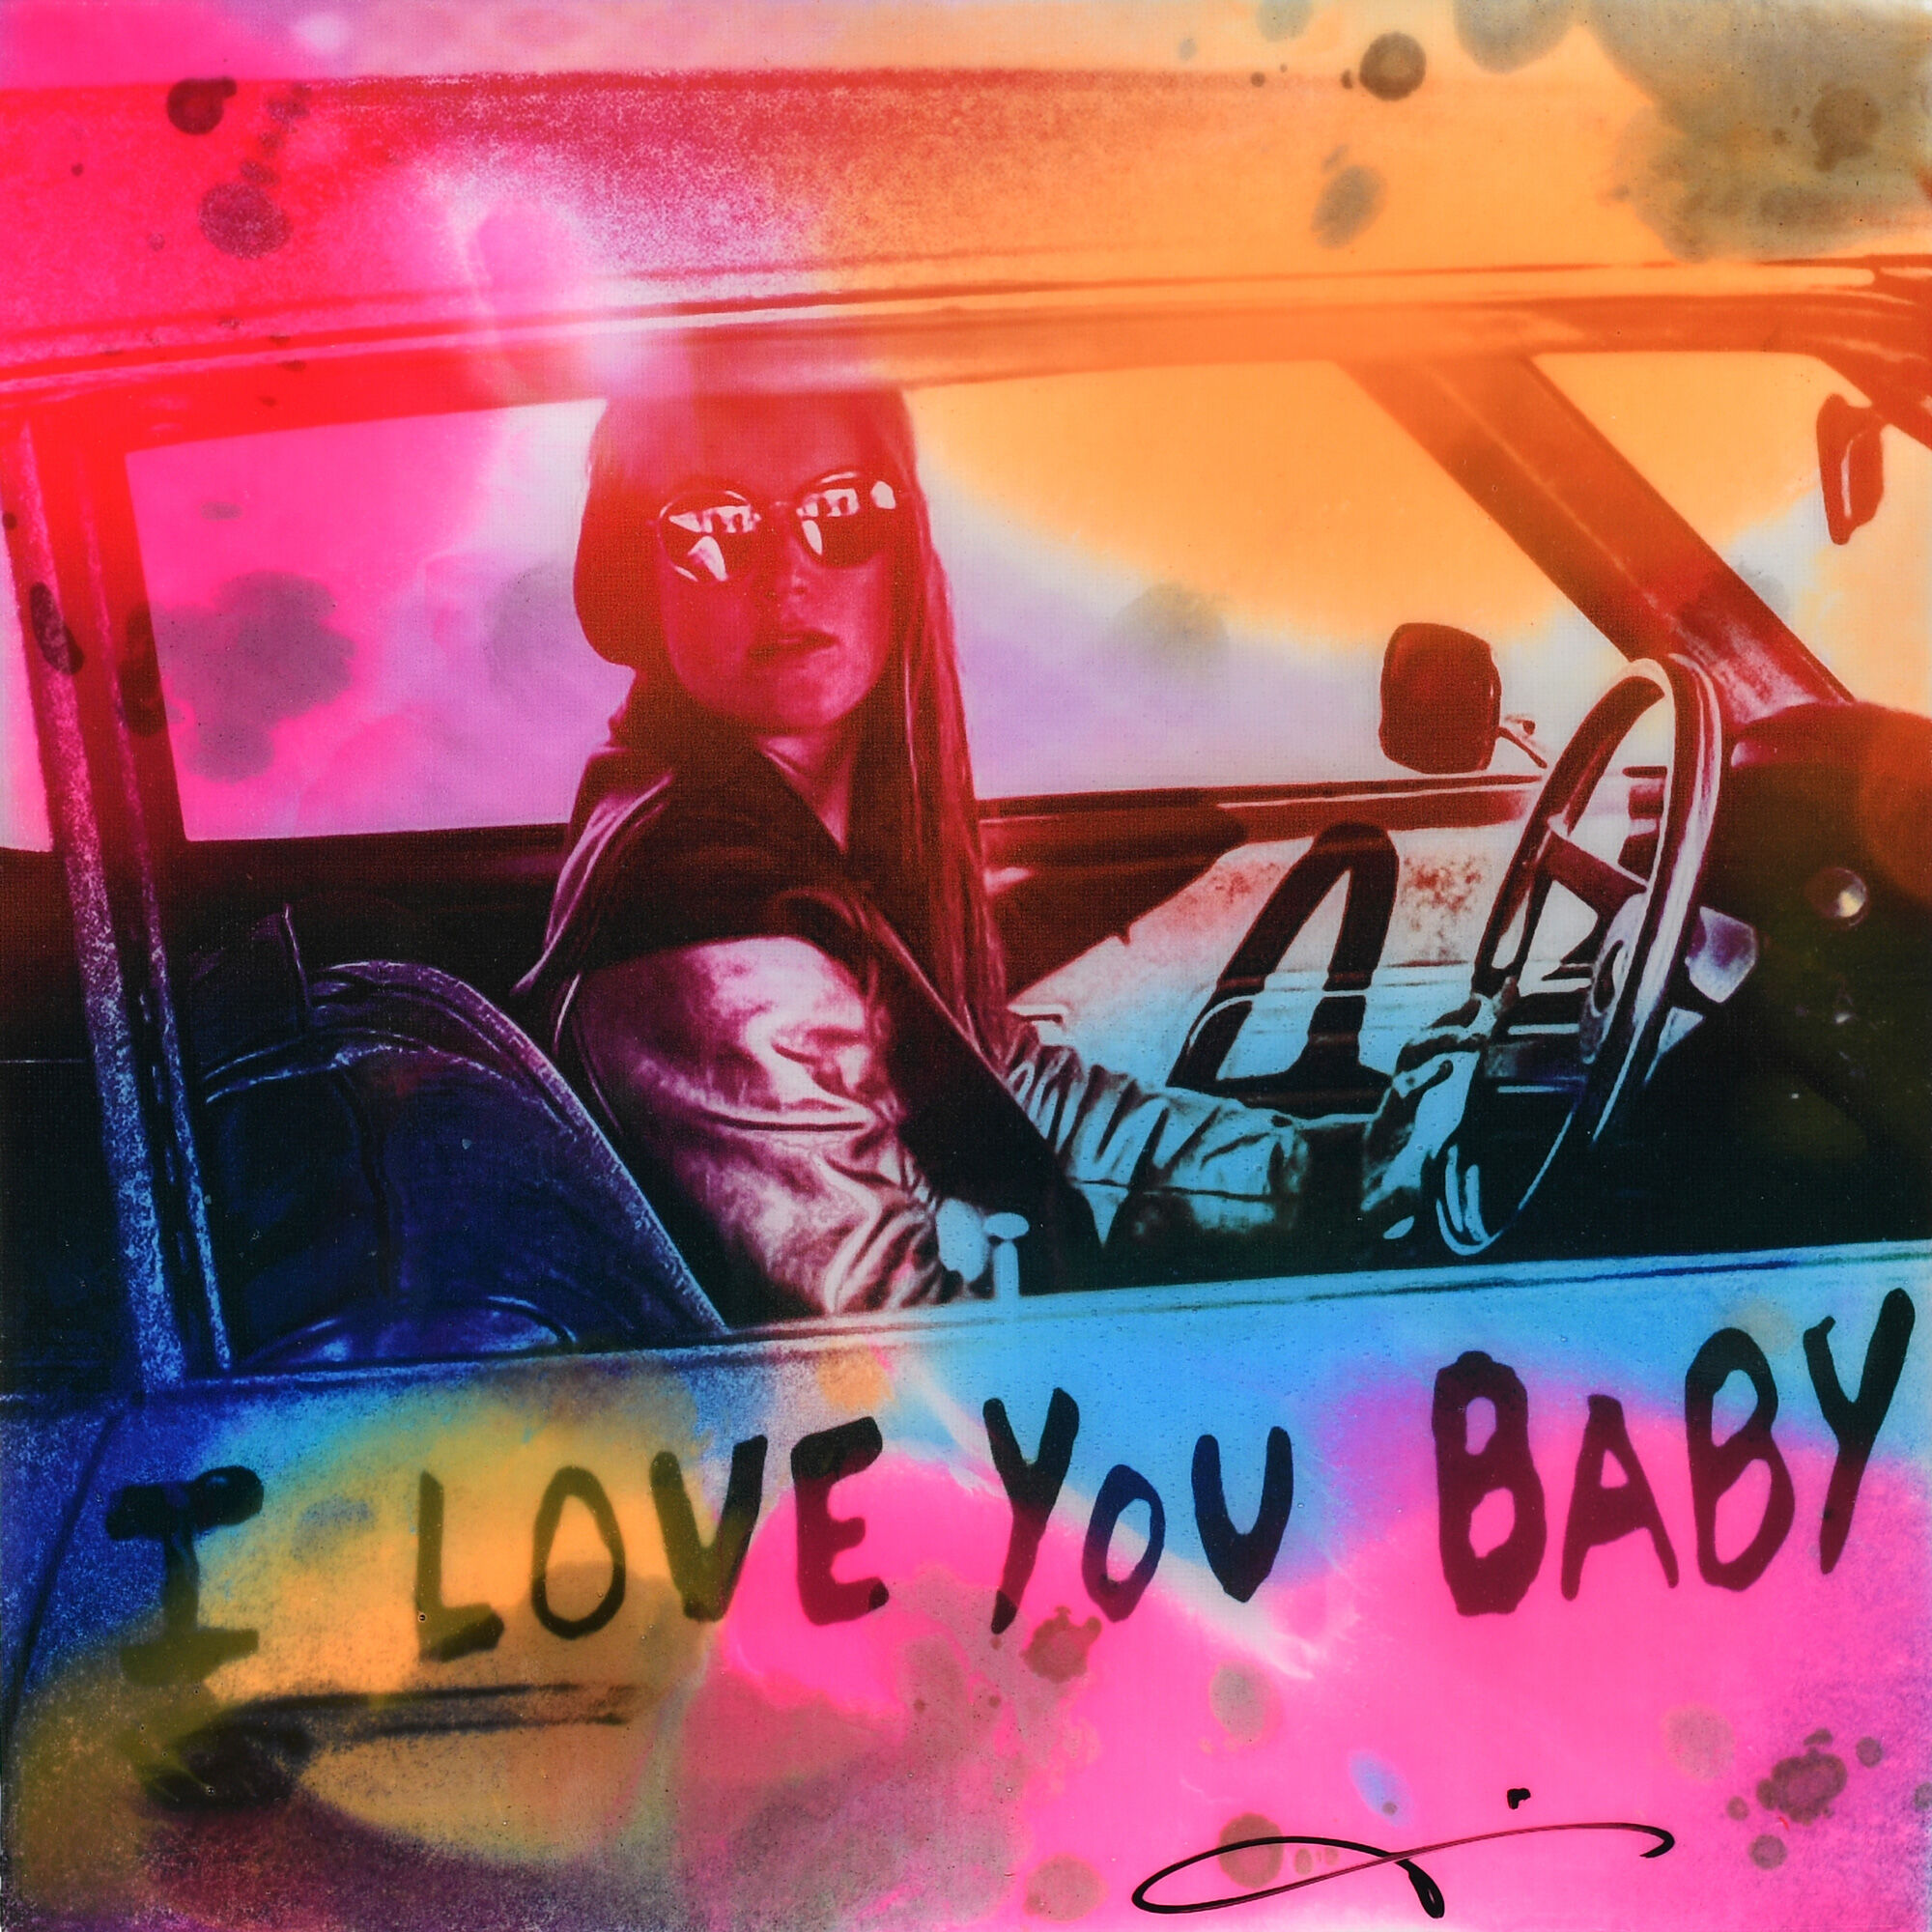 Picture "Love you baby" (2019) by Jörg Döring